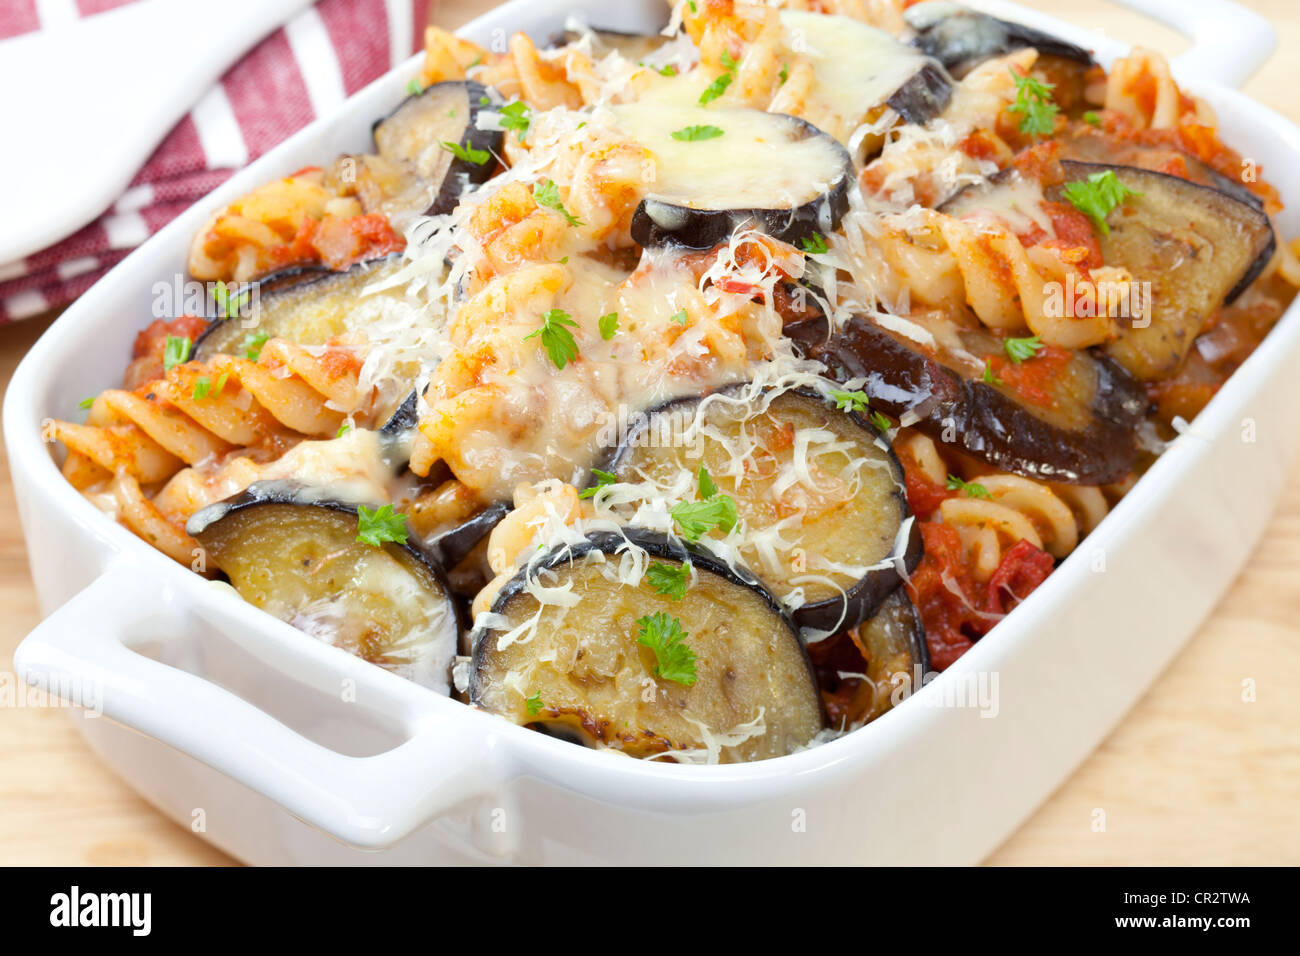 Pasta bake, with tomato sauce, eggplant fried in olive oil, mozzarella and parmesan on top. Stock Photo